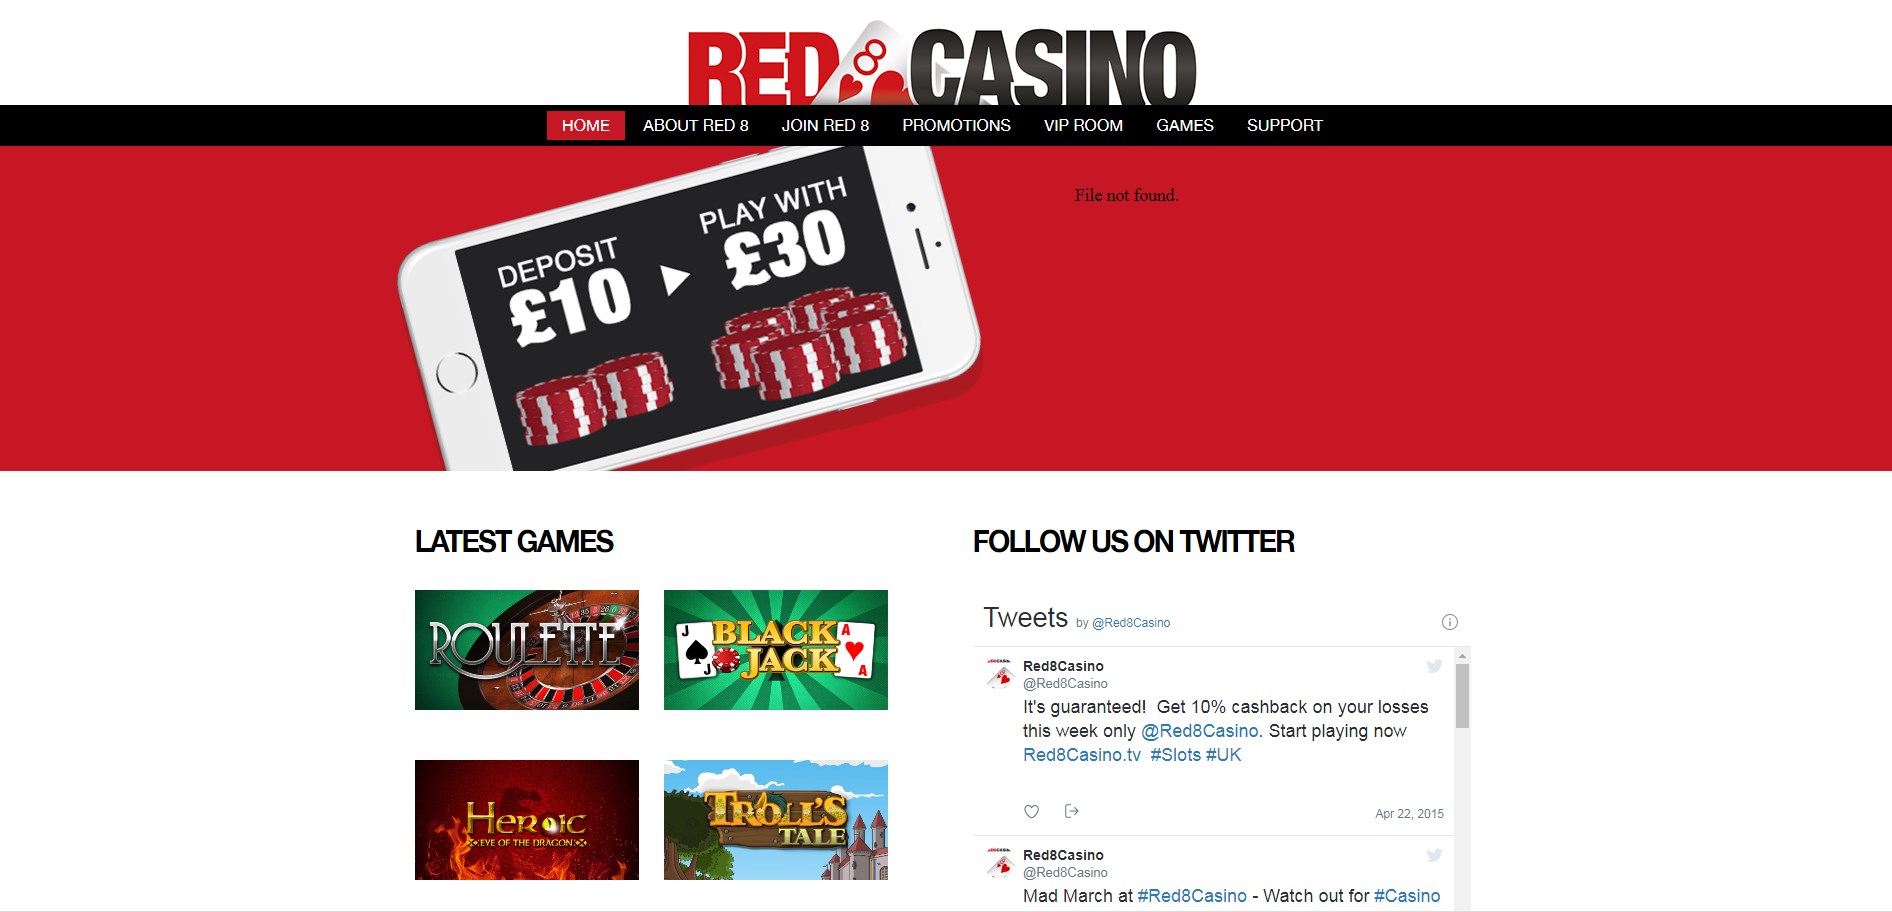 Red 8 Casino Review